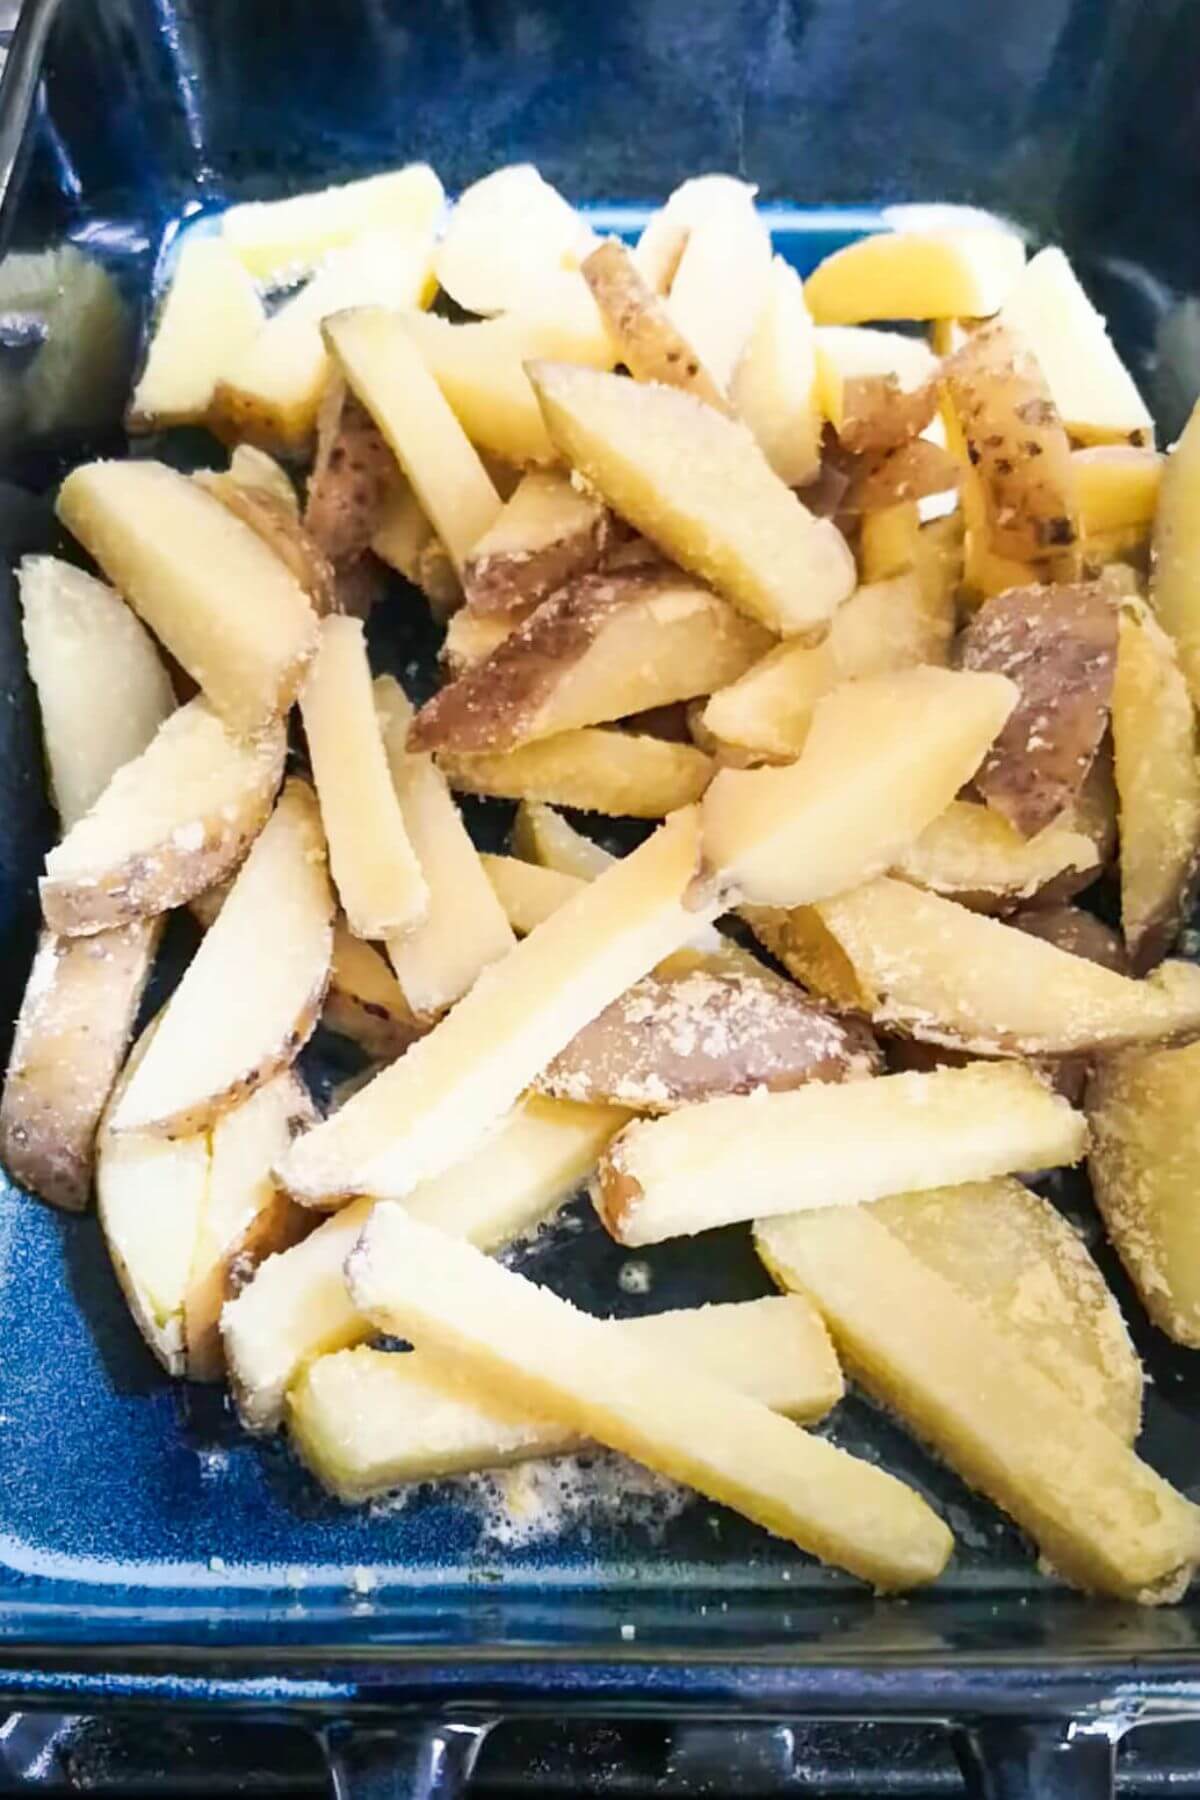 Polenta dusted chips in a large blue oven dish.